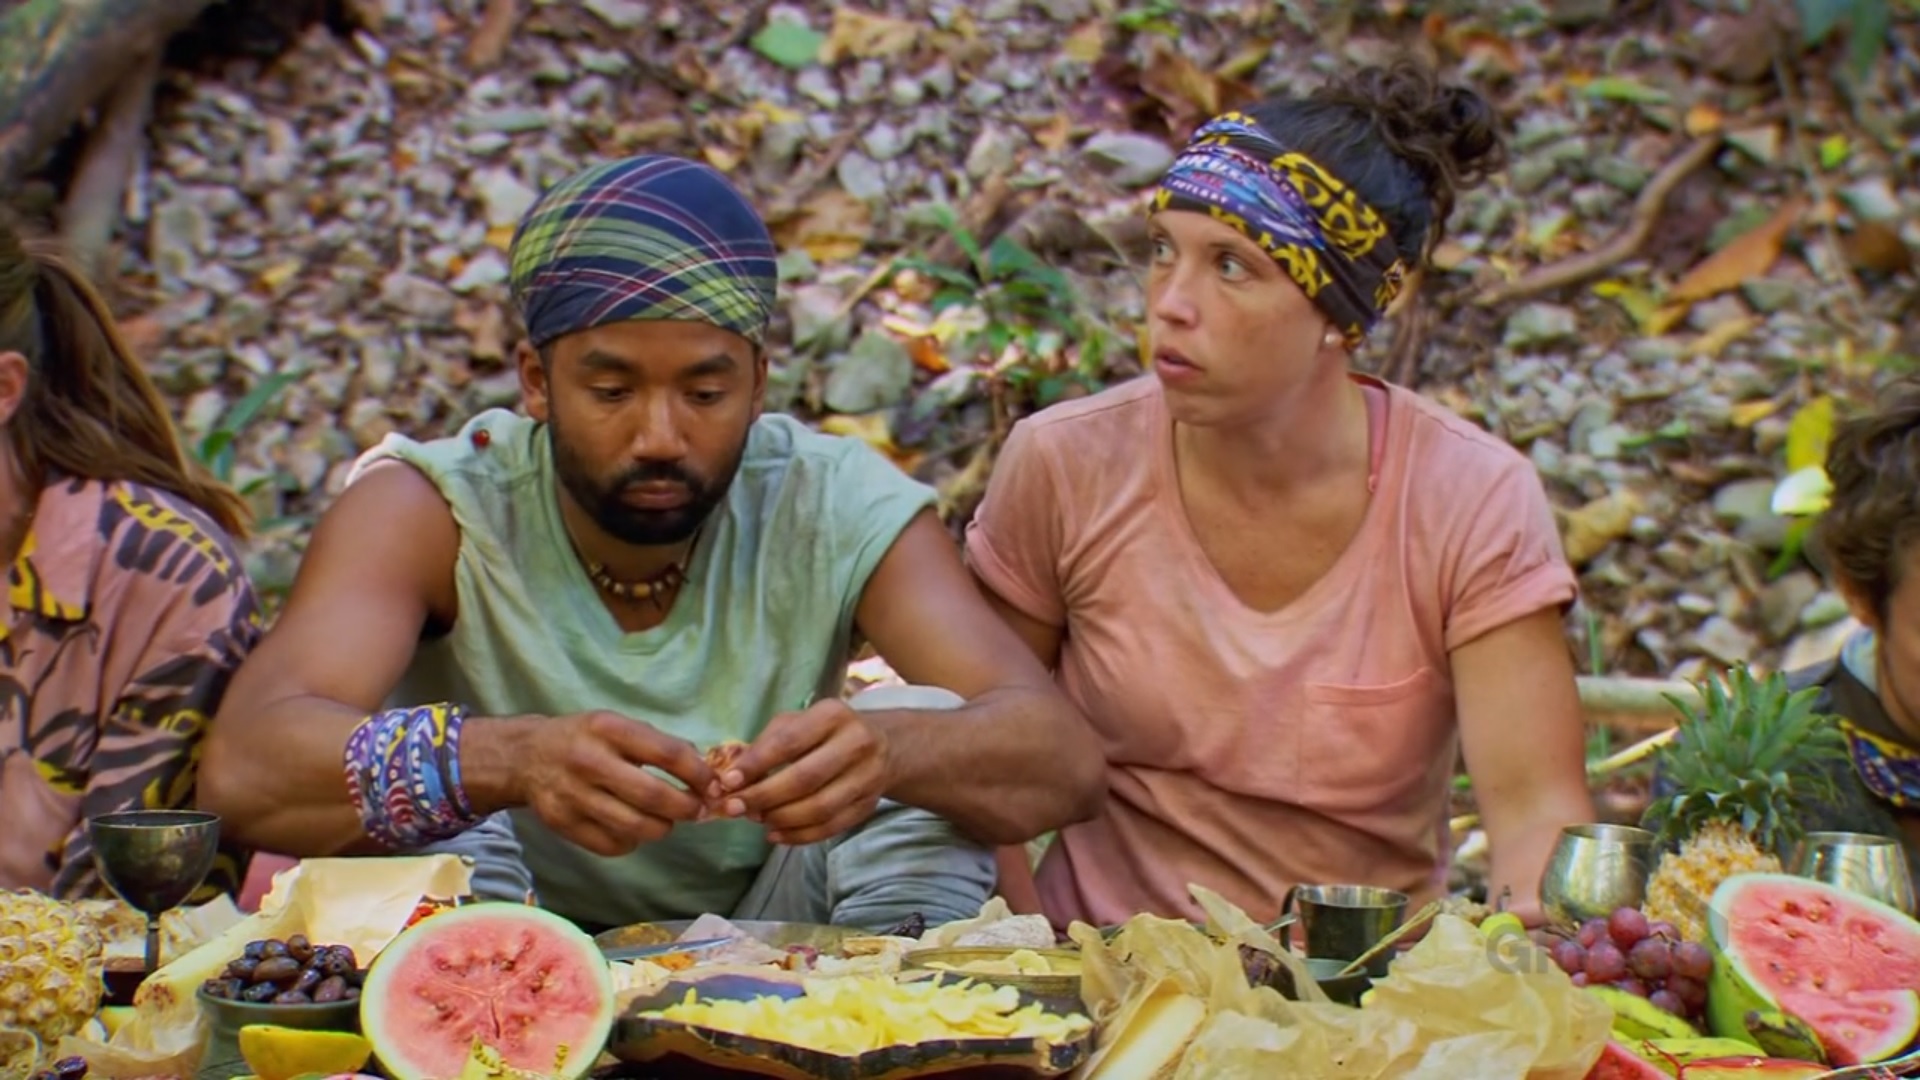 Sarah & Wendell at the merge feast on Survivor: Winners at War